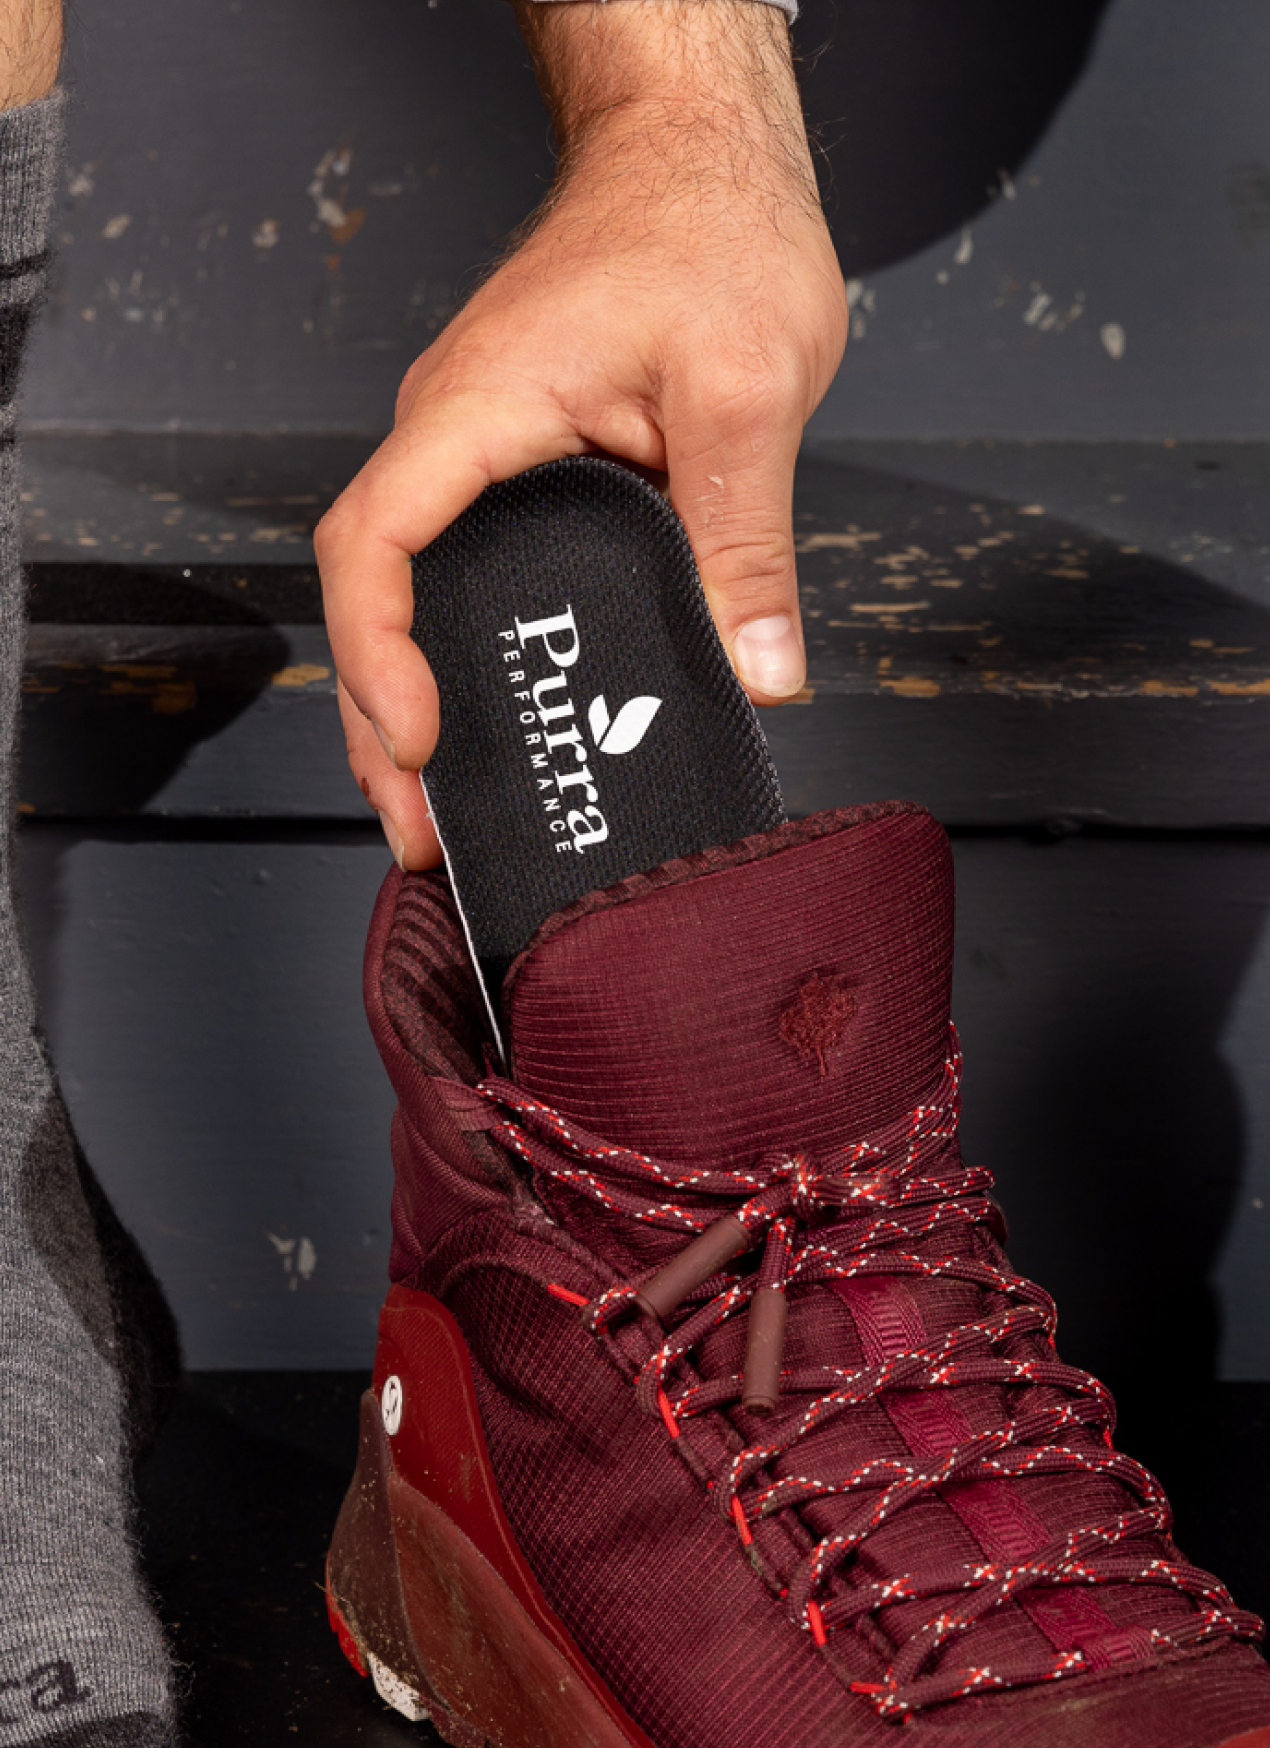 A man's hand is inserting a Purra insole into a dark red pair of hiking boots.  He is sittng on grey color wooden step to do this and is wearing the soon to be available Purra Merino Wool hiking socks